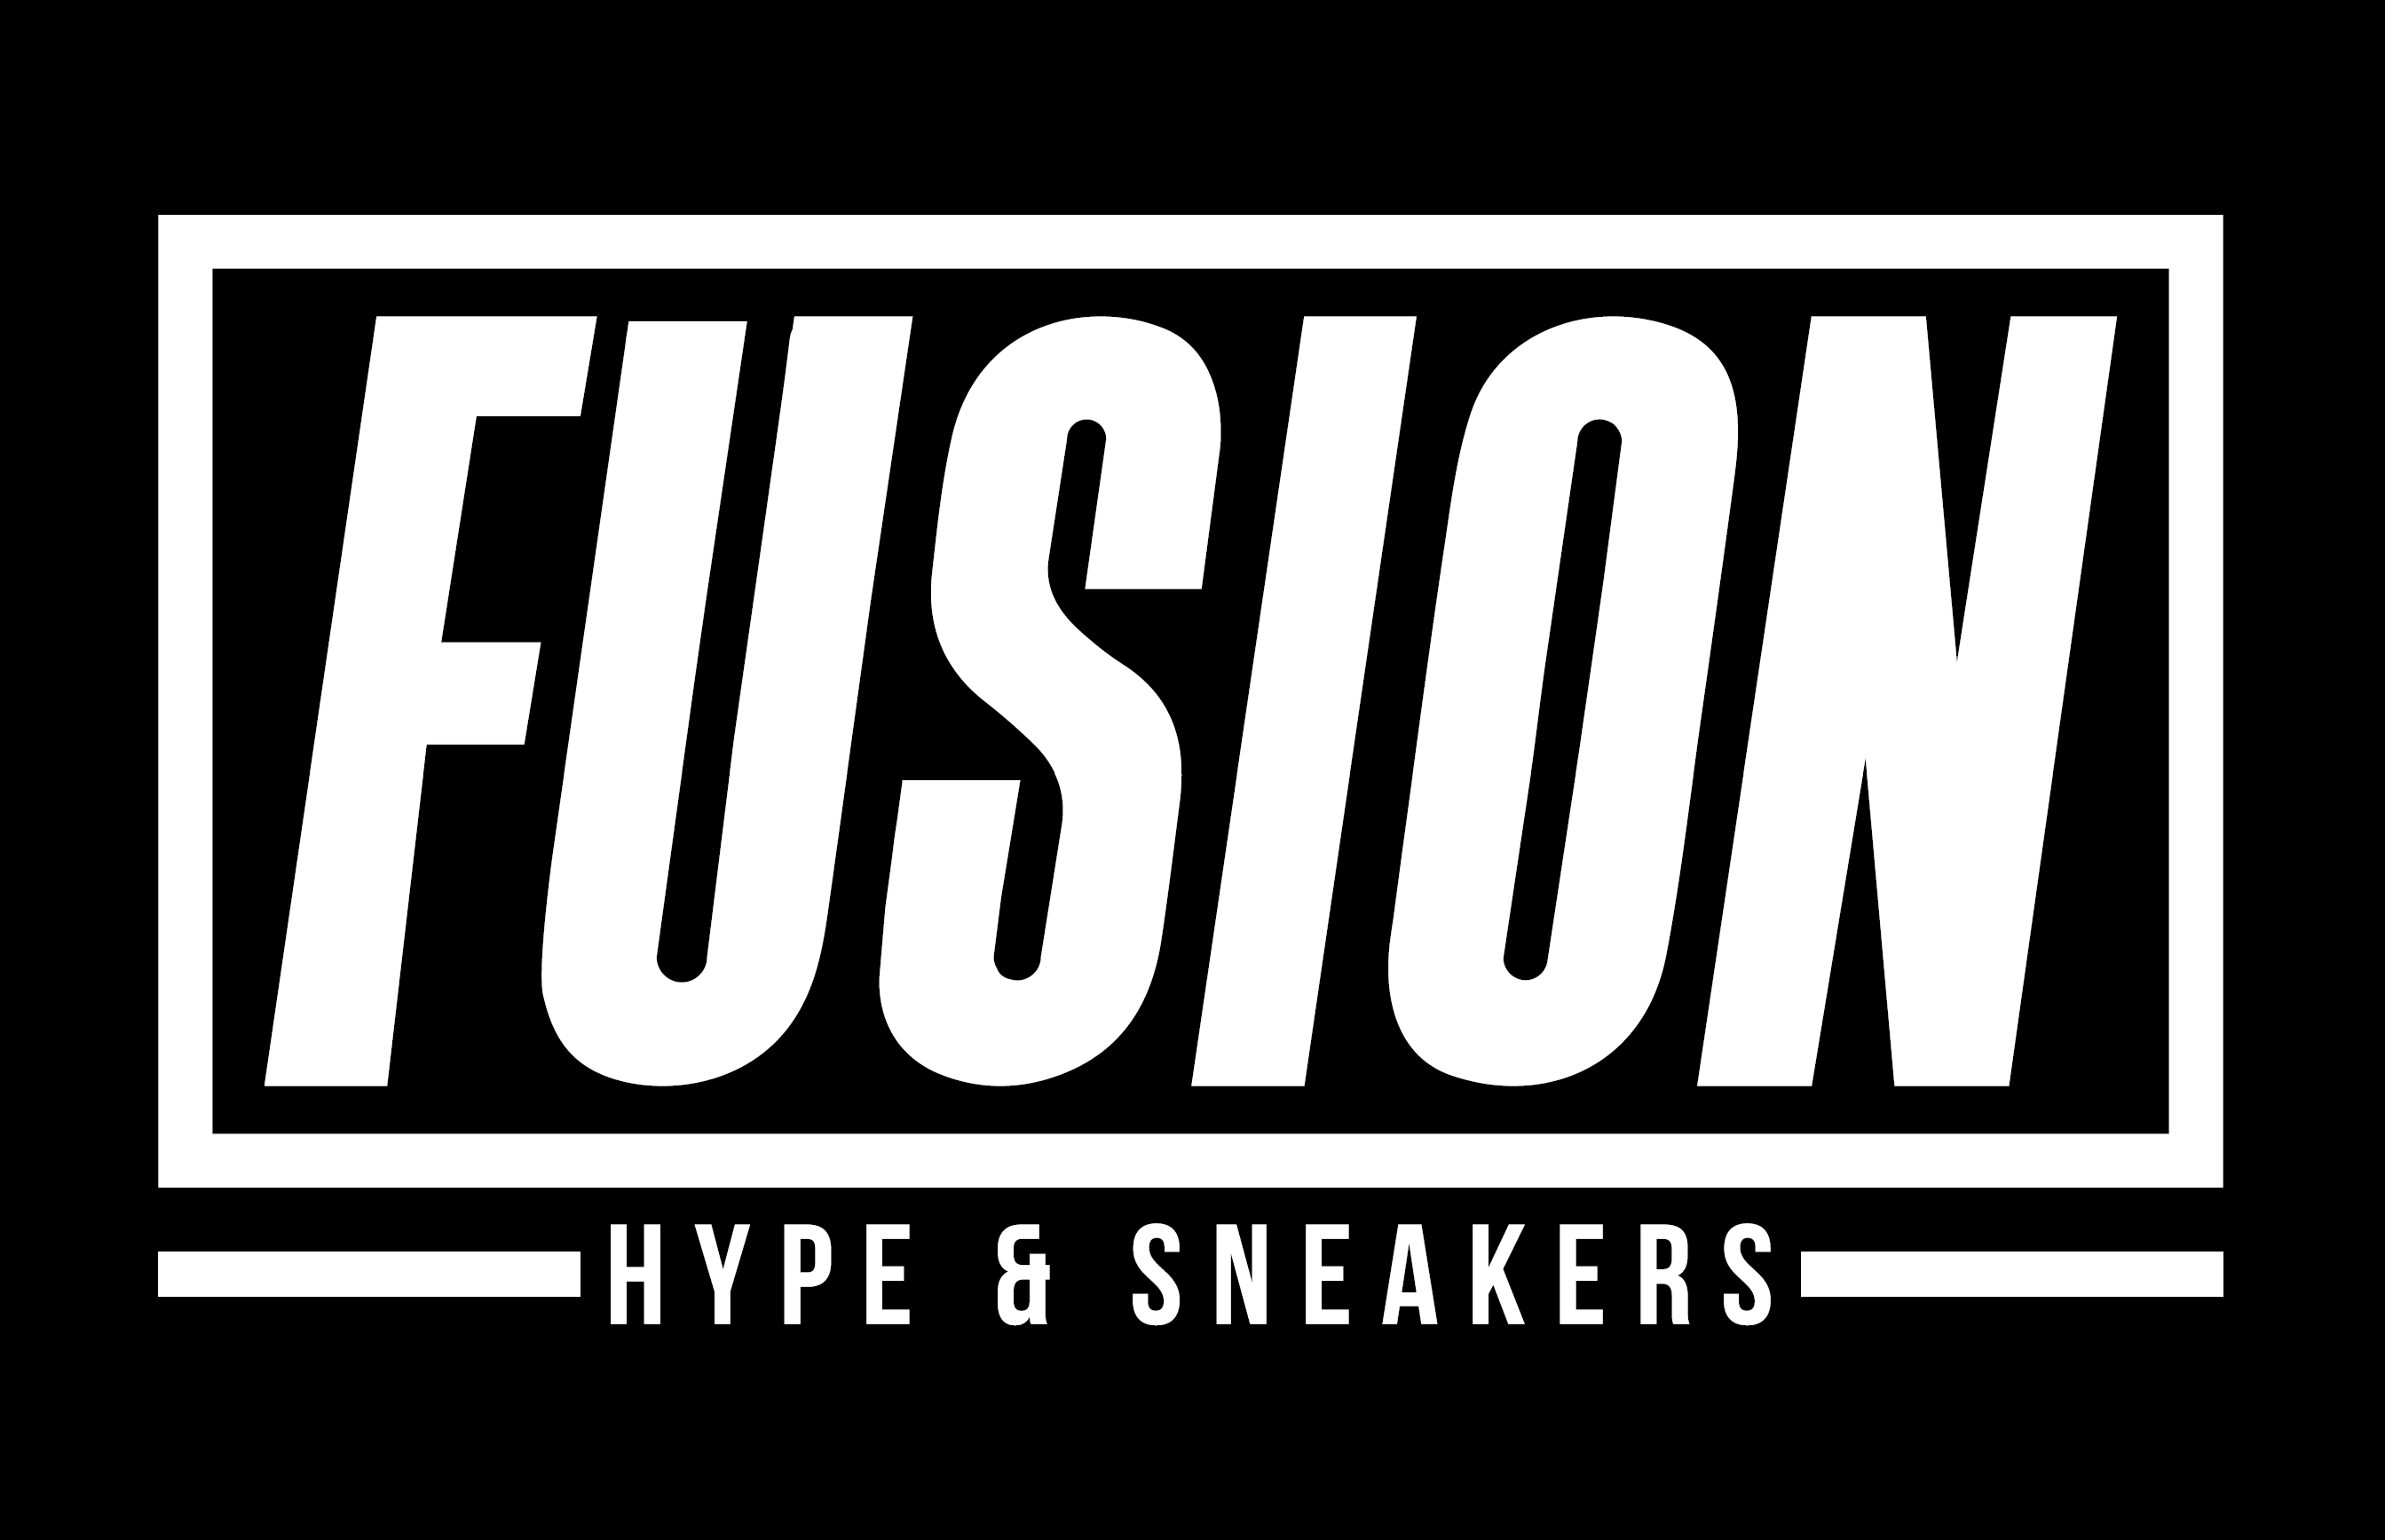  Fusion Sneakers 